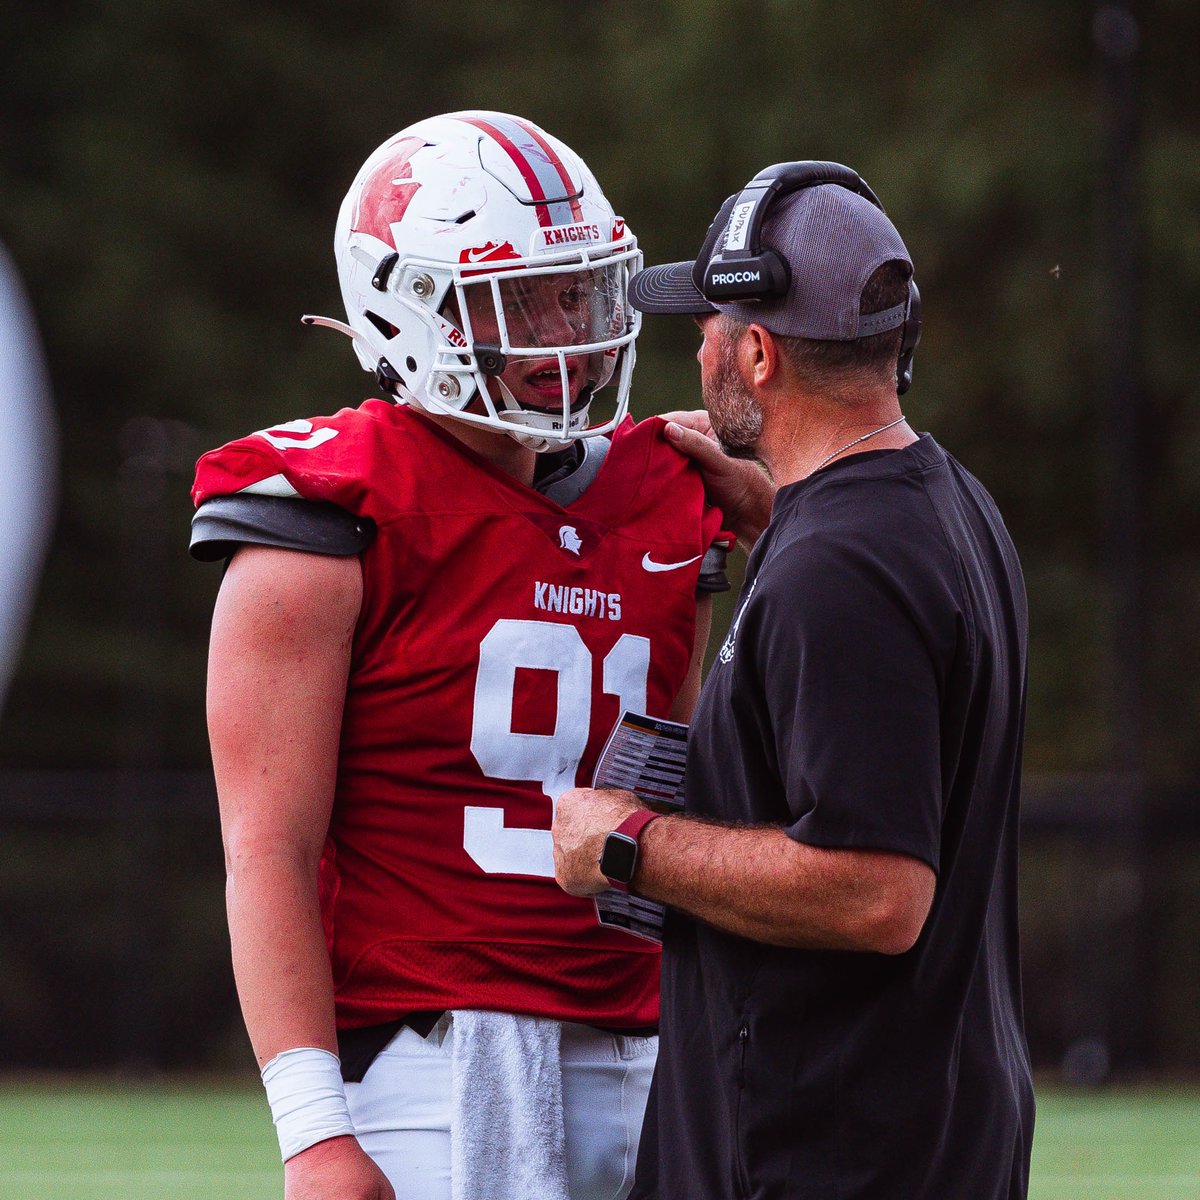 Throughout spring ball, @CoachJoeDuPaix has emphasized a critical trait of champions: overcoming the 'natural man.' The natural man tends to seek shortcuts and choose the path of least resistance. In contrast, champions are meticulous about doing the little things correctly in